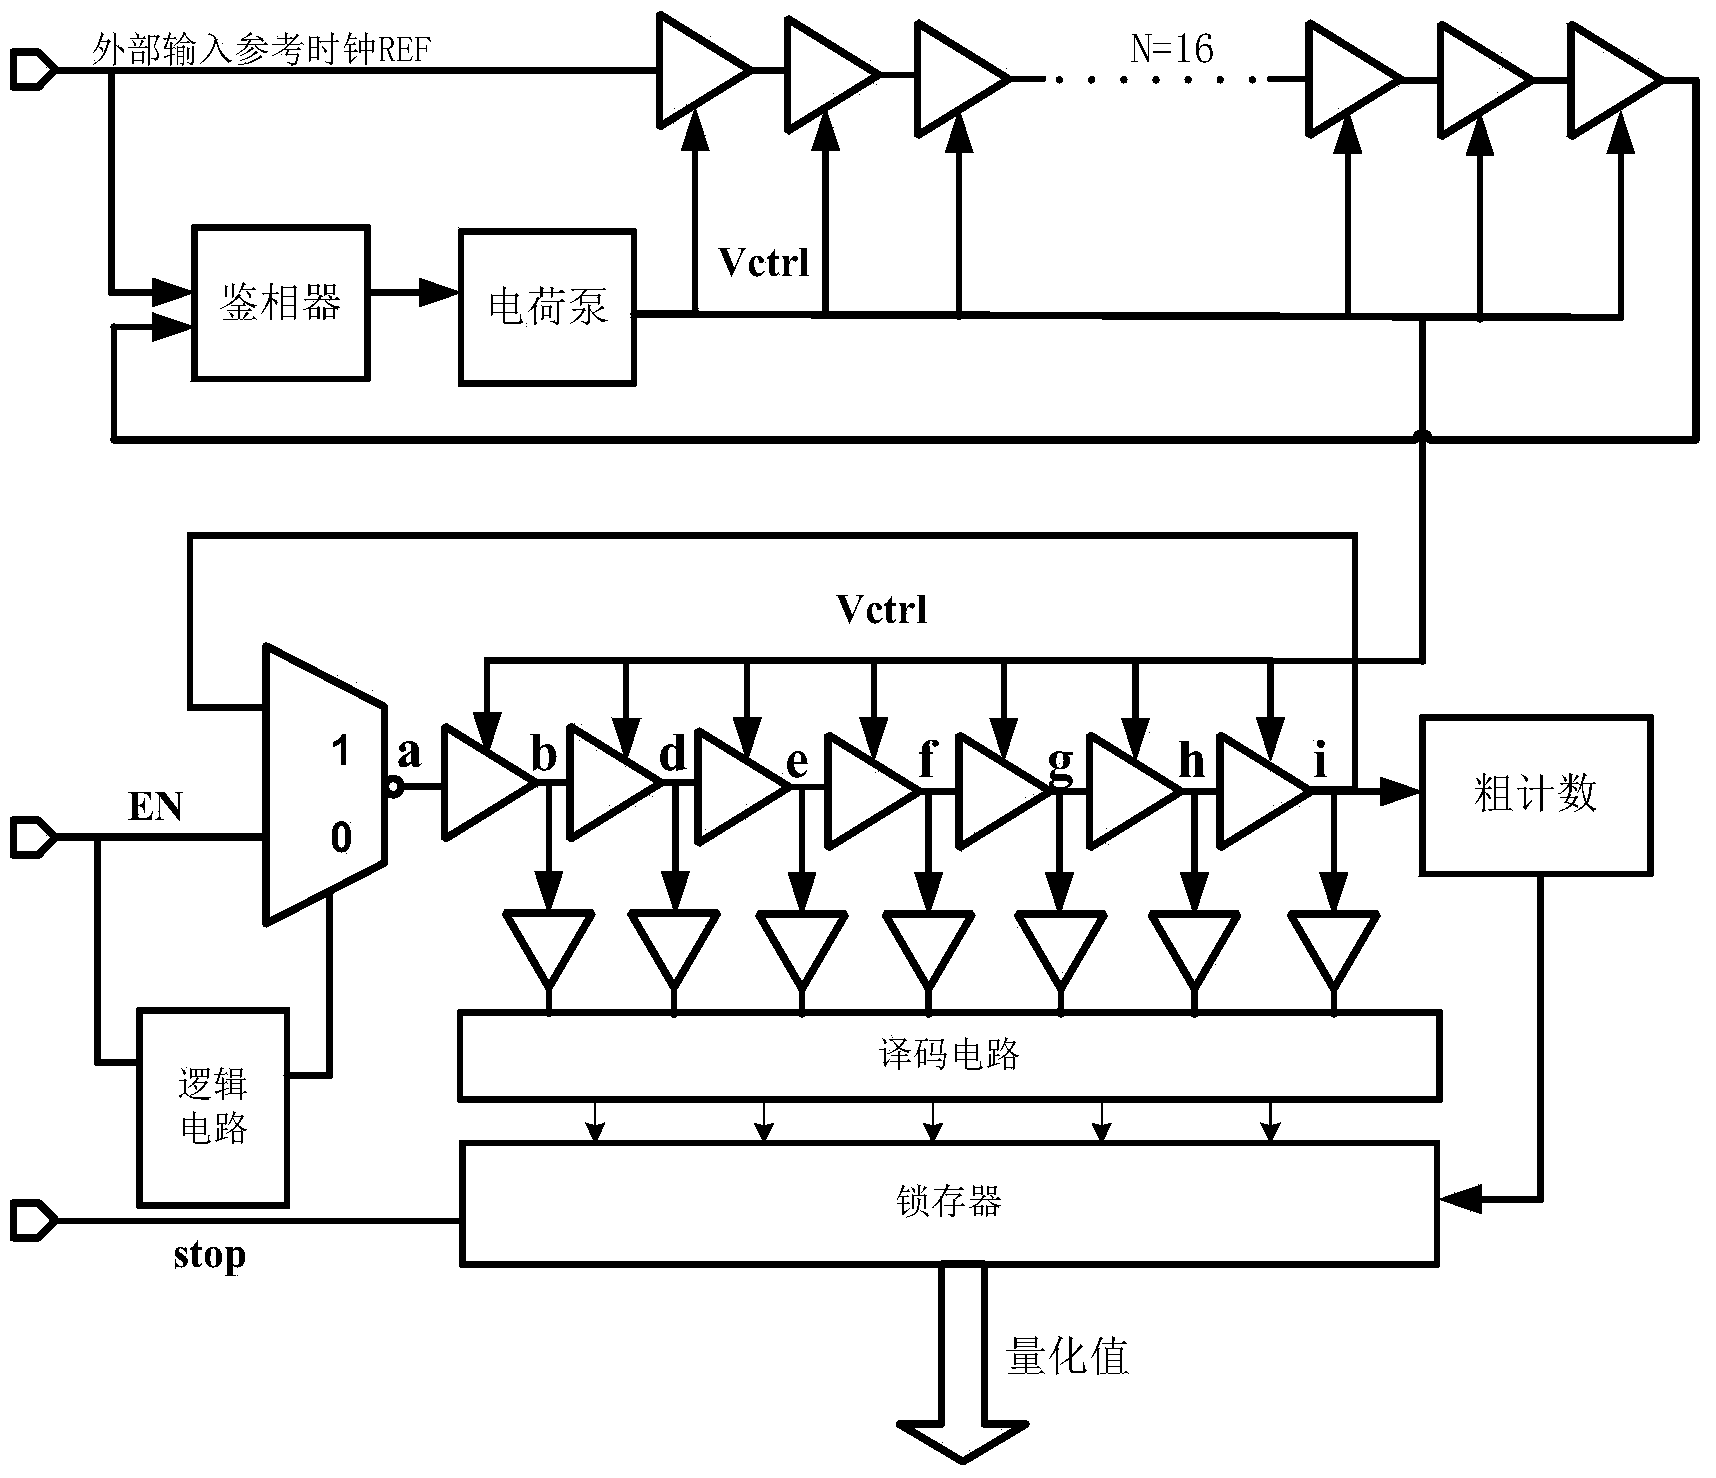 Voltage-control ring vibration type two-section type time digital conversion circuit based on DLL